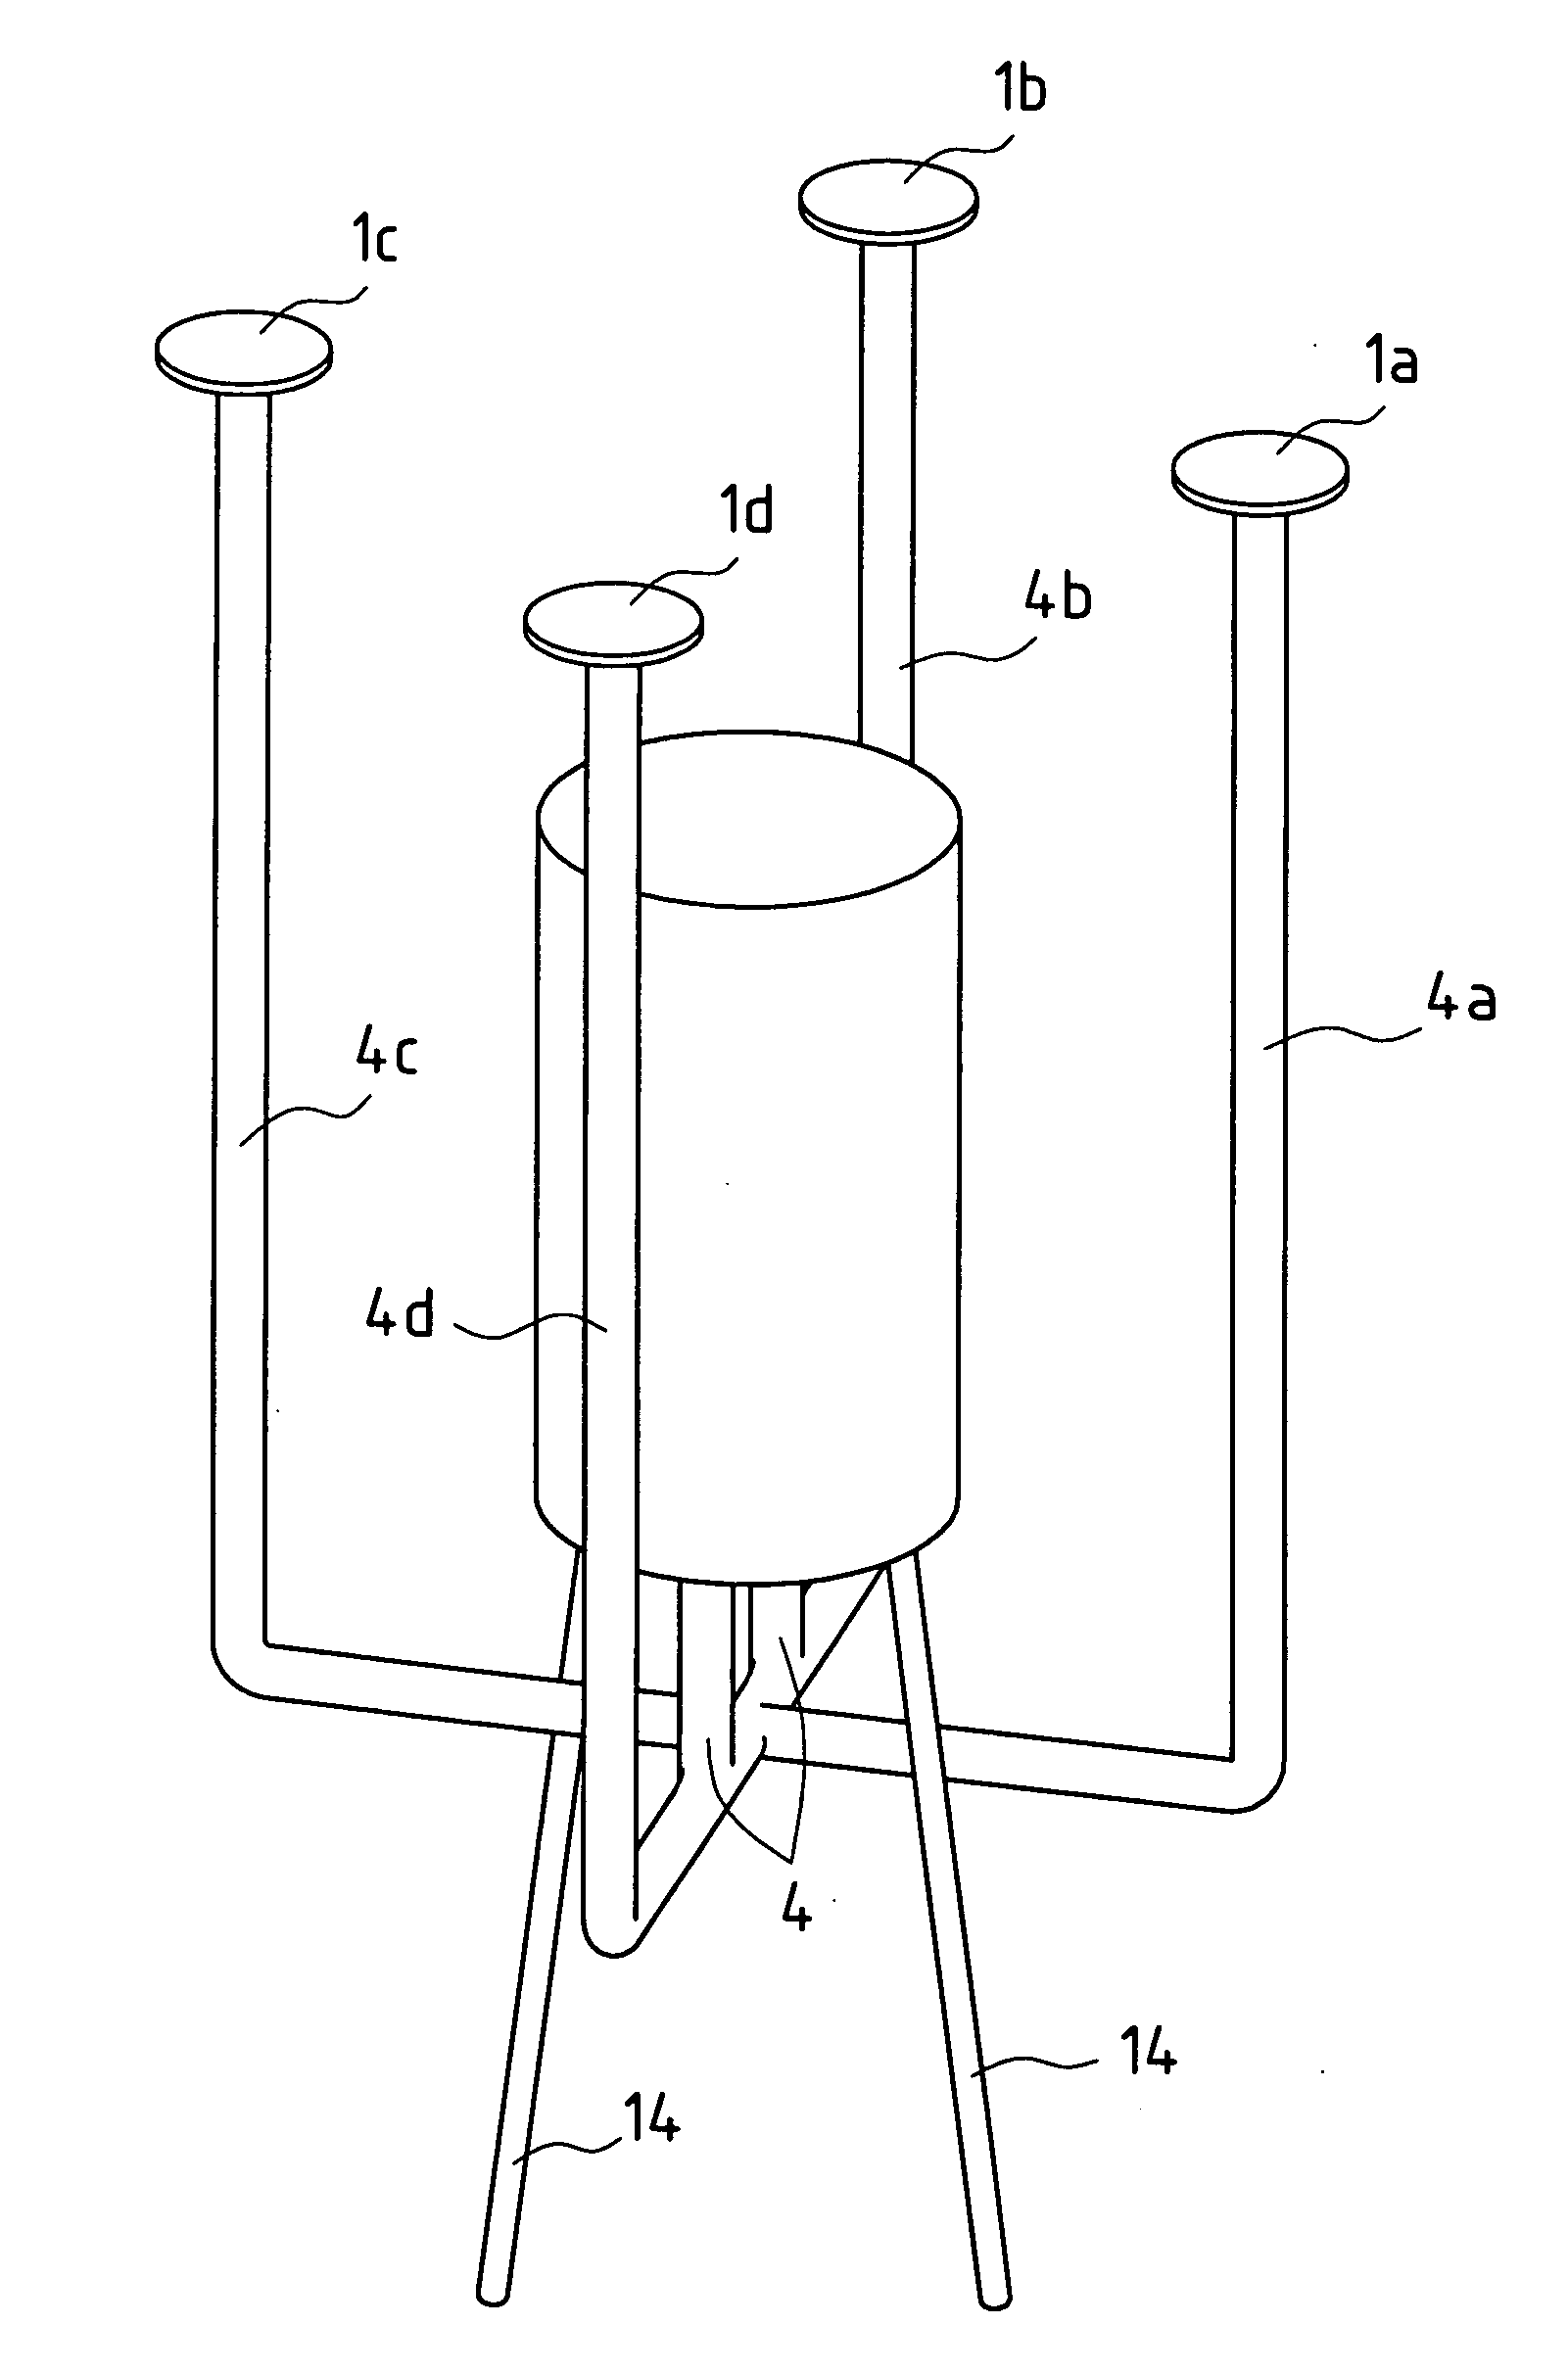 Load weighting control apparatus